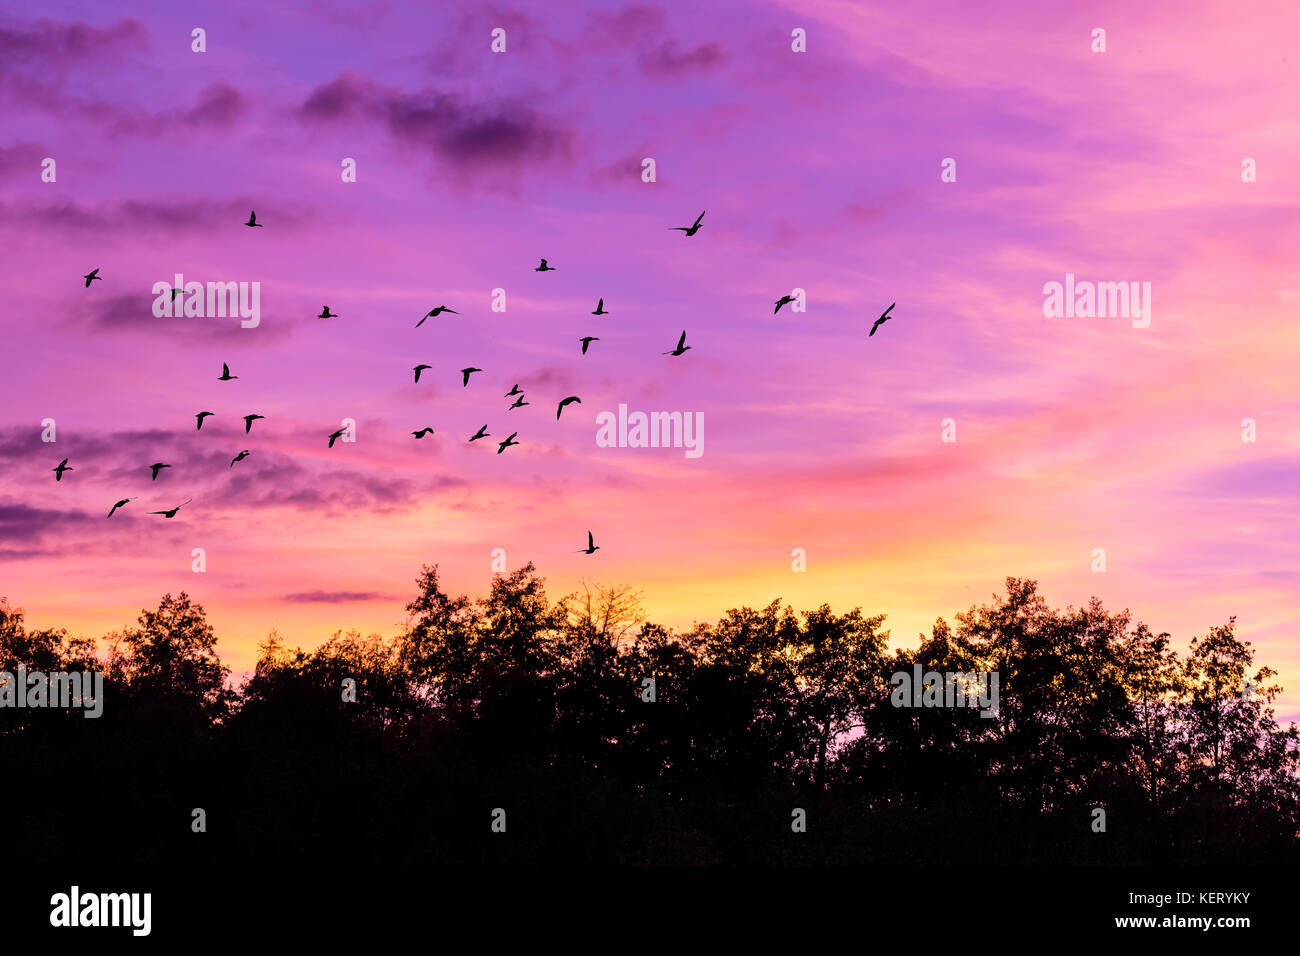 Beautiful vibrant sunset above a forest. The flock of a birds flying above a trees. Many warm colors. Stock Photo